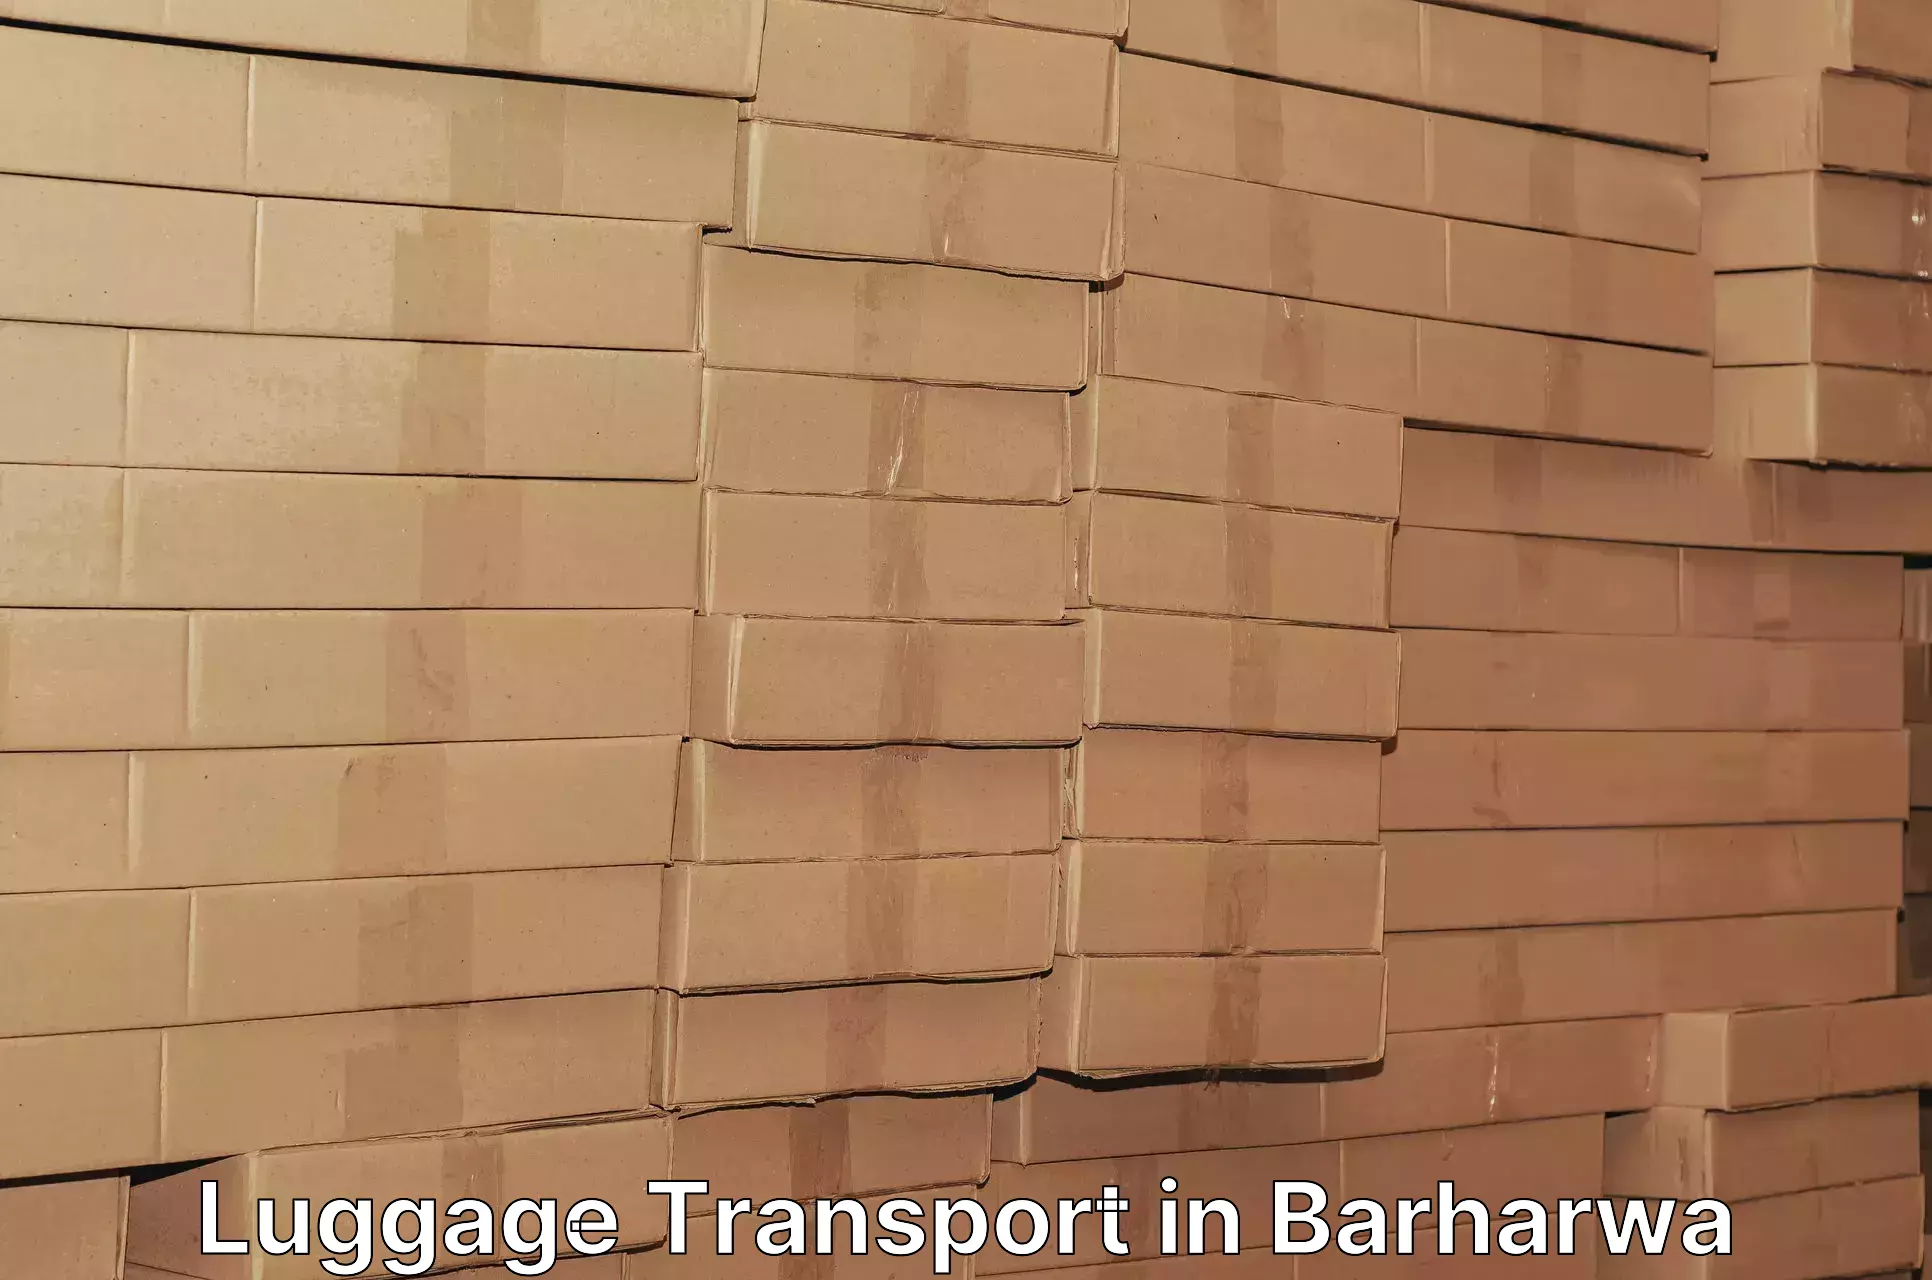 Luggage transport rates in Barharwa